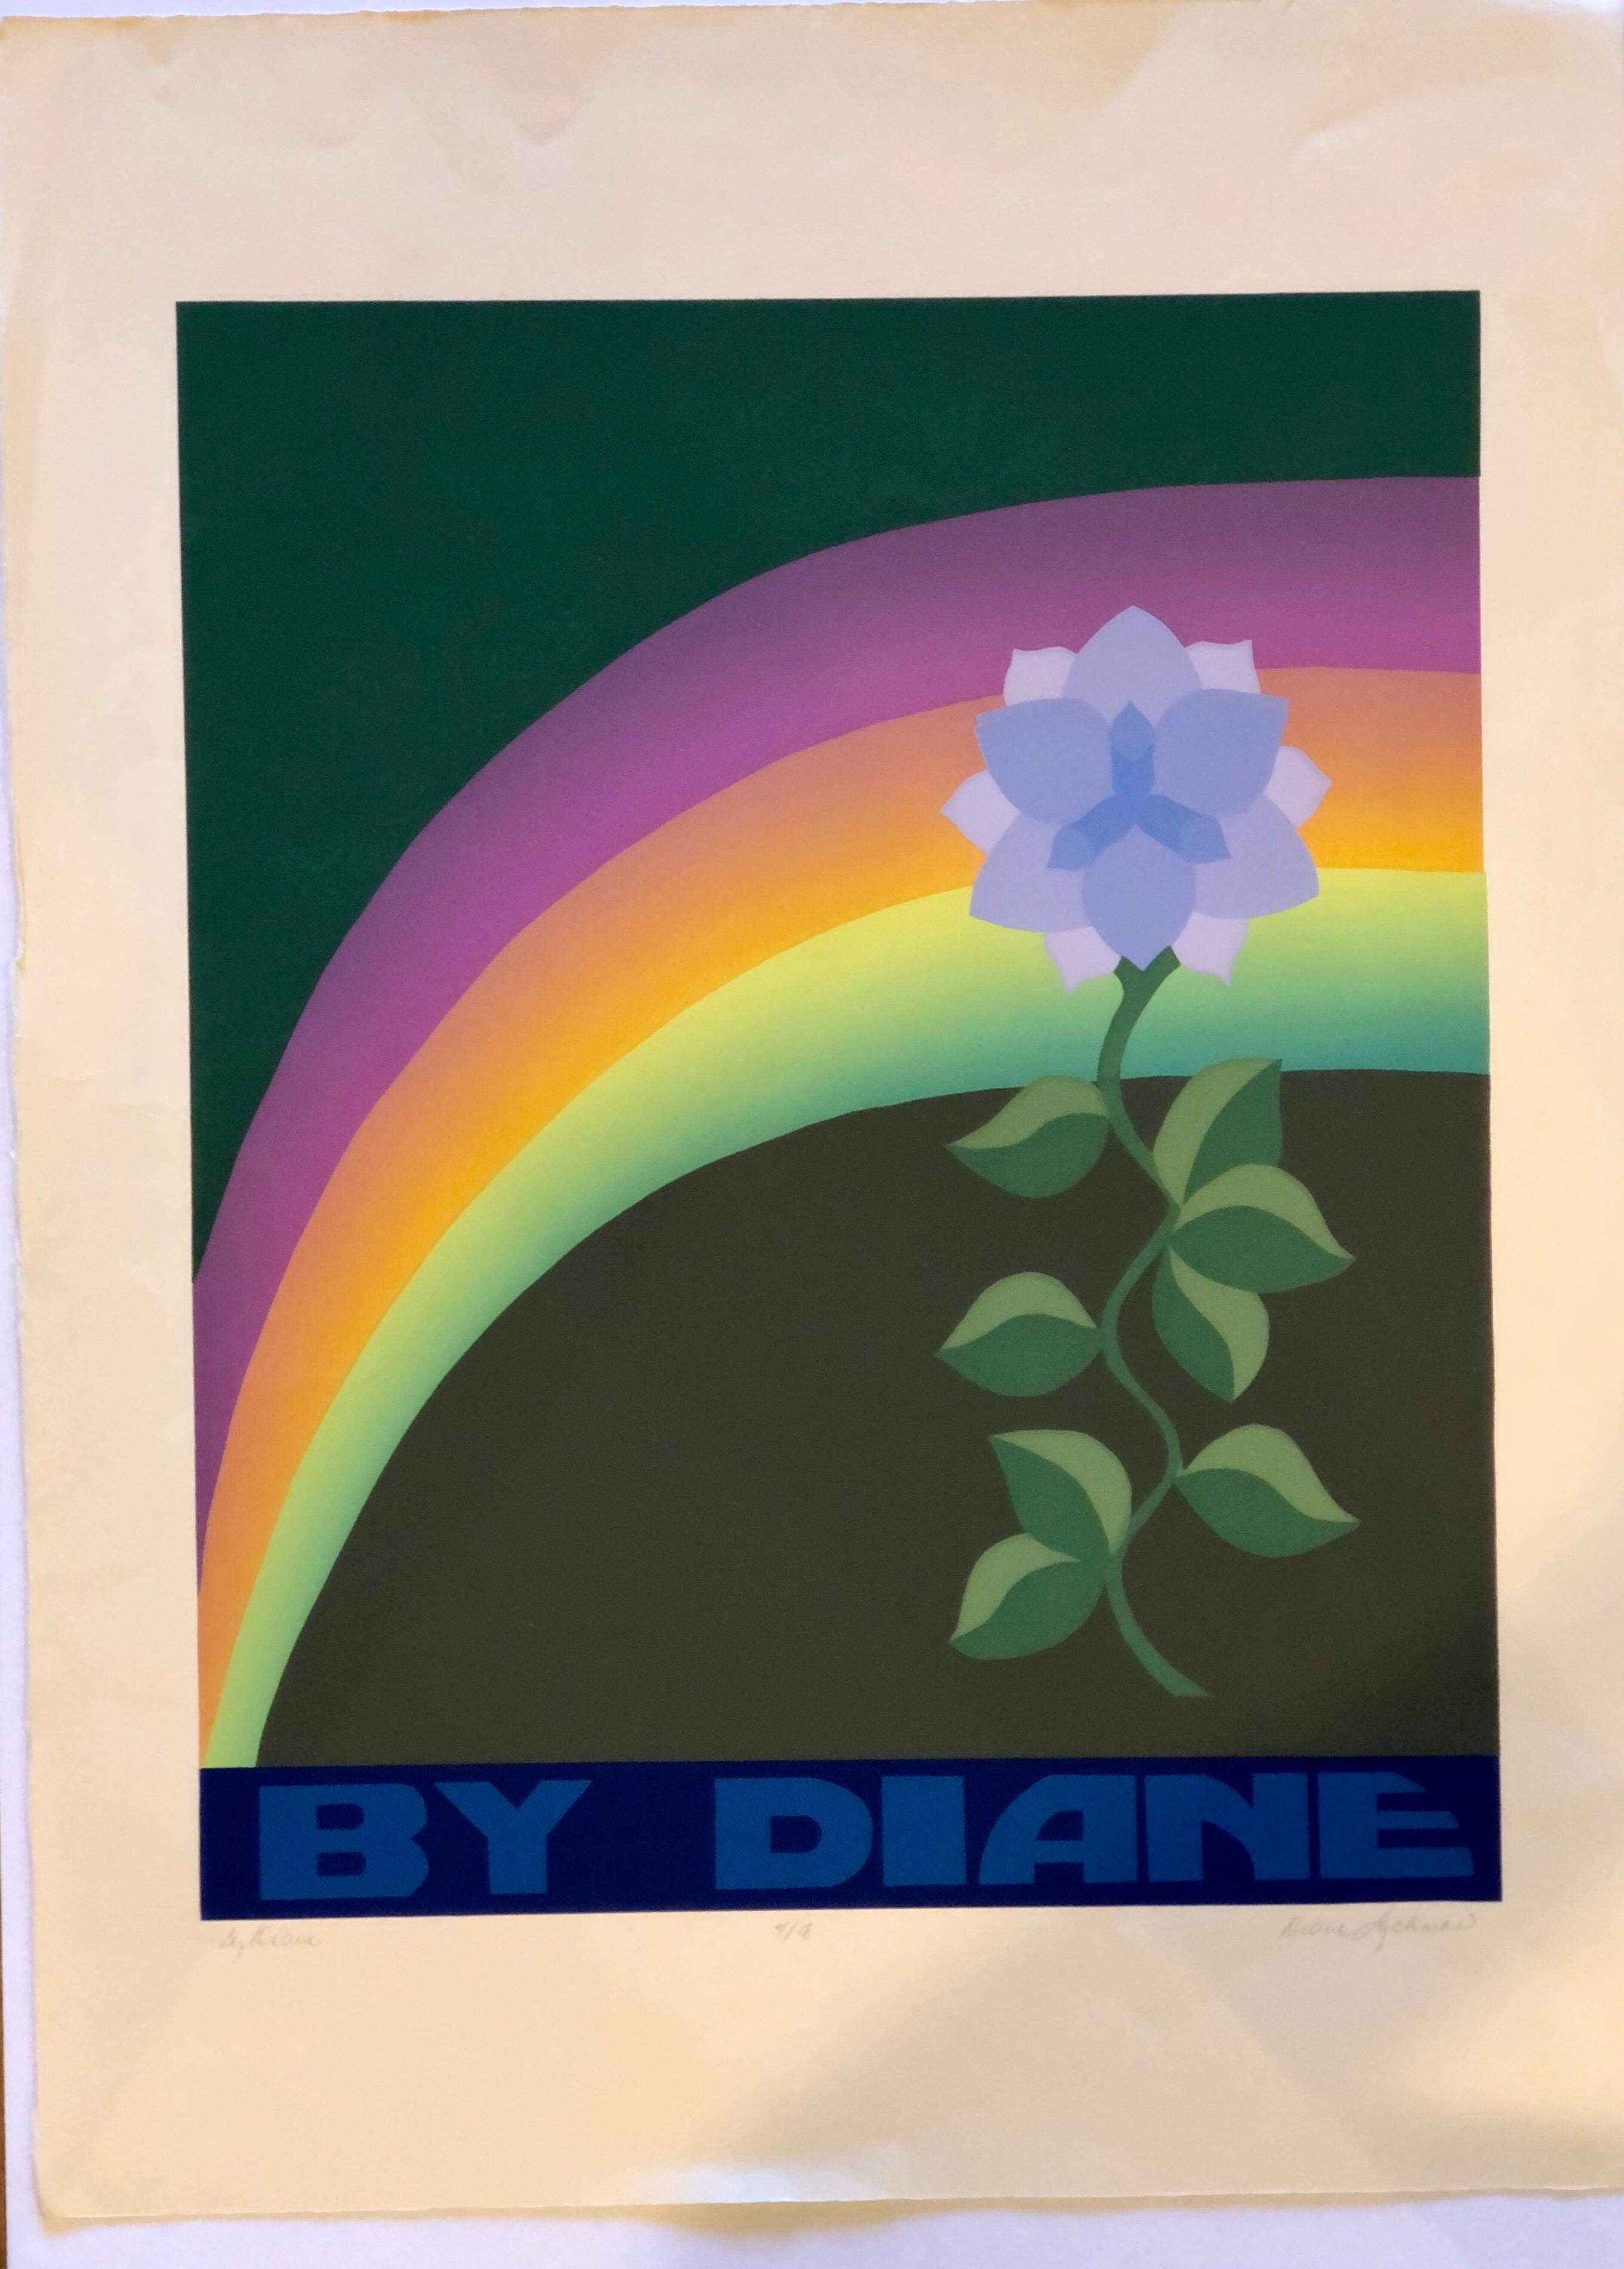 Nice colors on this unframed litho by Diane never used or exposed circa 1980s, ready to be framed.